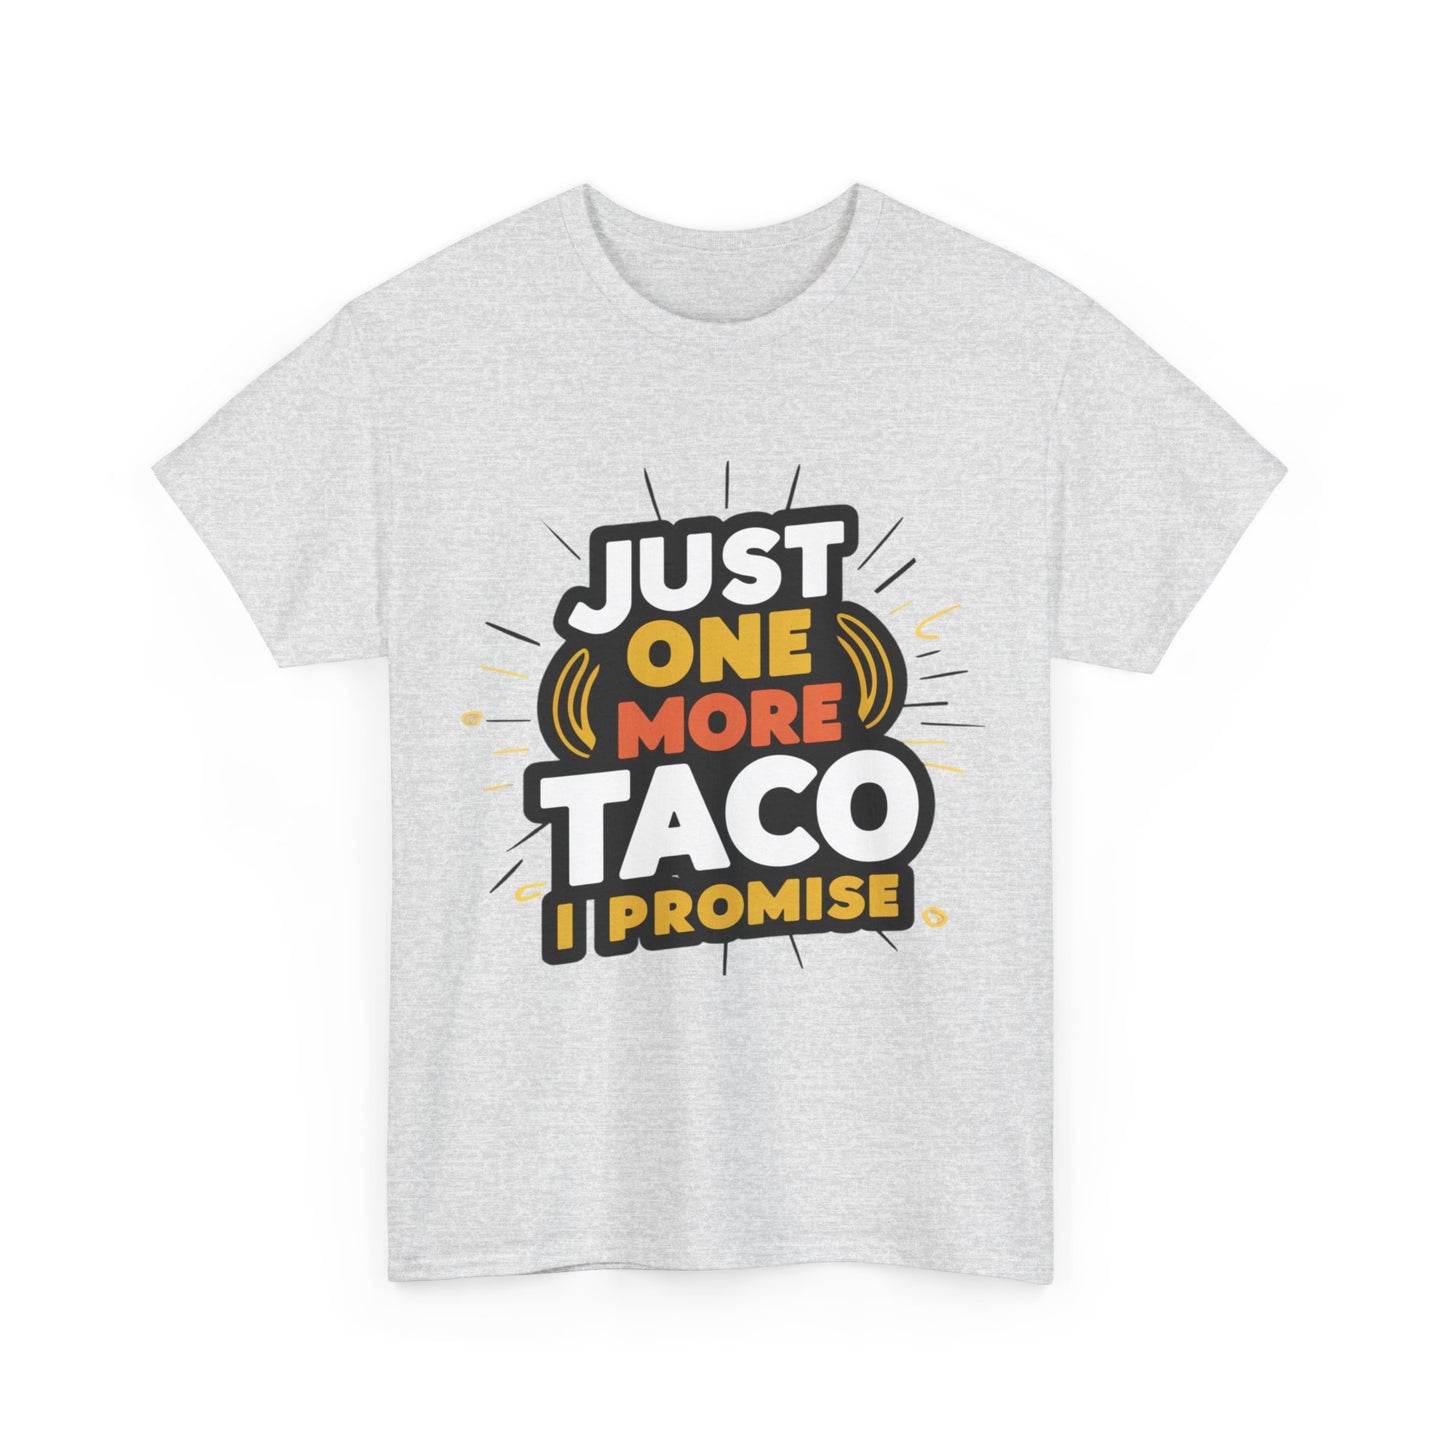 Just One More Taco I Promise Mexican Food Graphic Unisex Heavy Cotton Tee Cotton Funny Humorous Graphic Soft Premium Unisex Men Women Ash T-shirt Birthday Gift-51